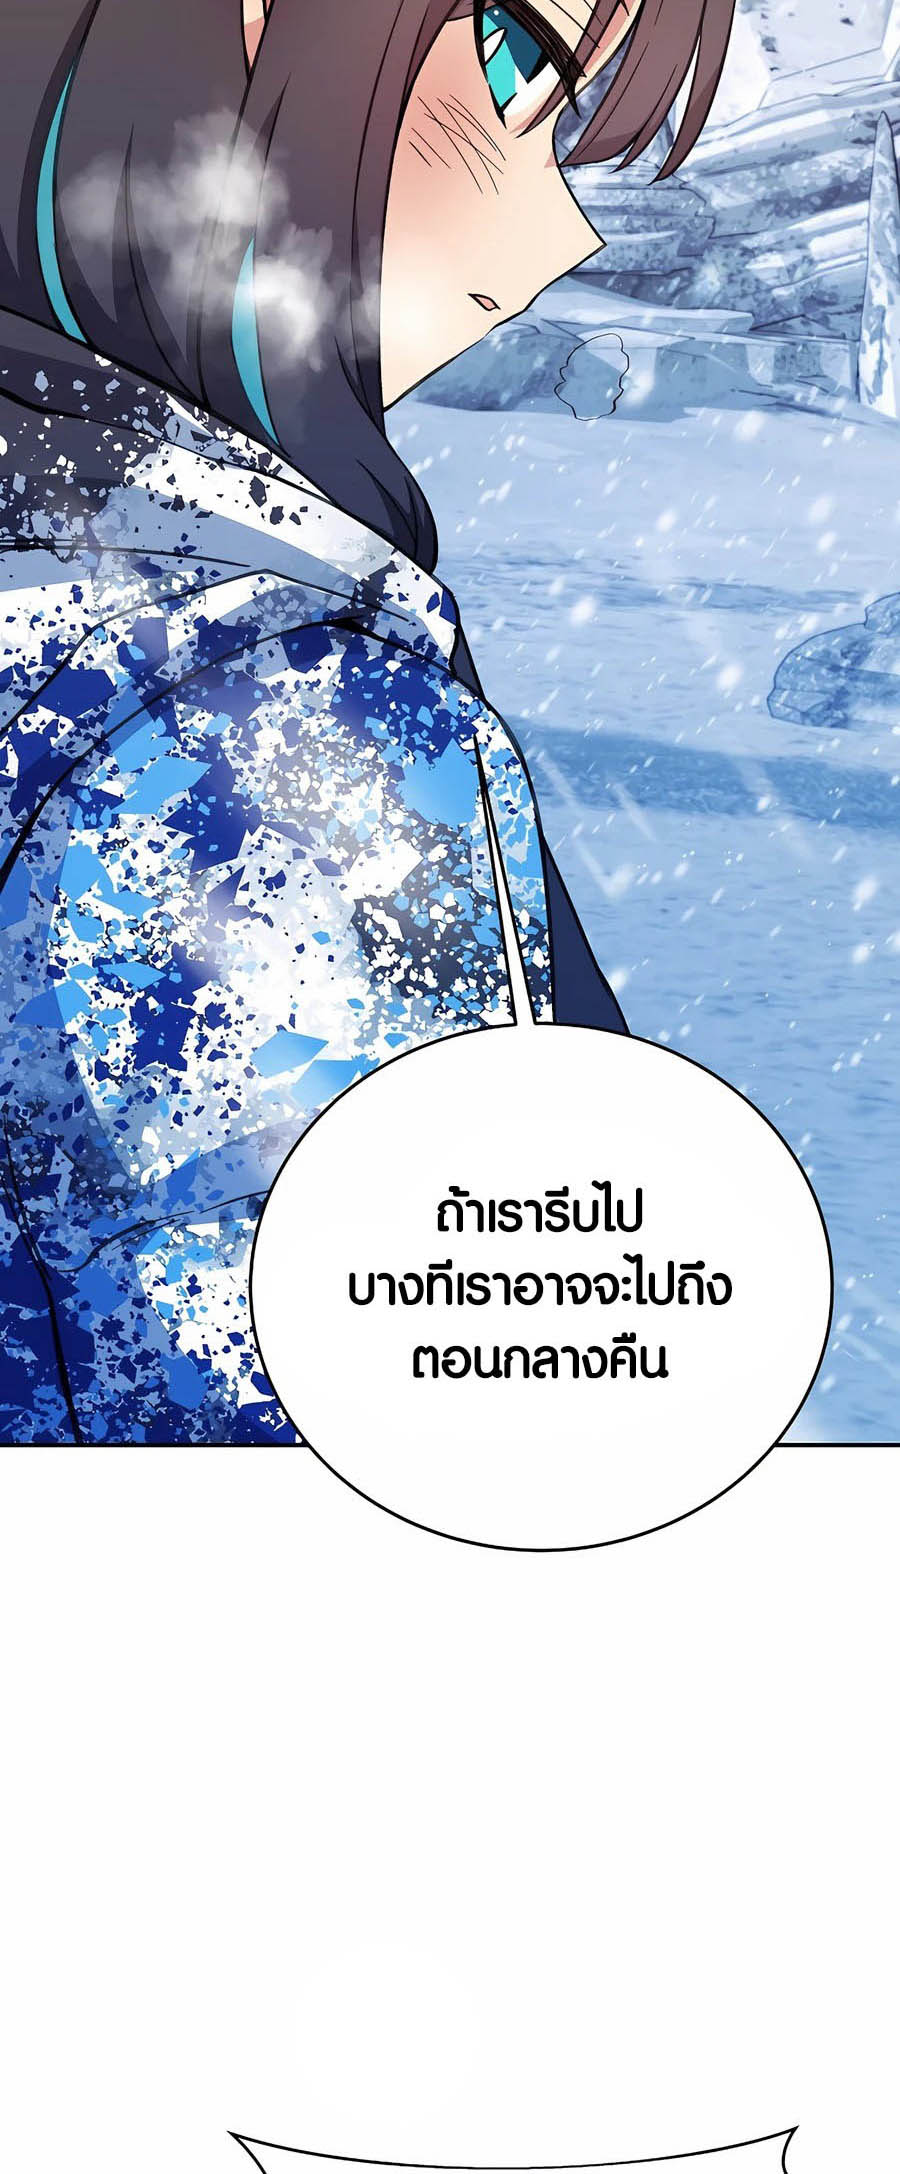 à¸­à¹ˆà¸²à¸™à¸¡à¸±à¸™à¸®à¸§à¸² à¹€à¸£à¸·à¹ˆà¸­à¸‡ The Part Time Land of the Gods 57 24